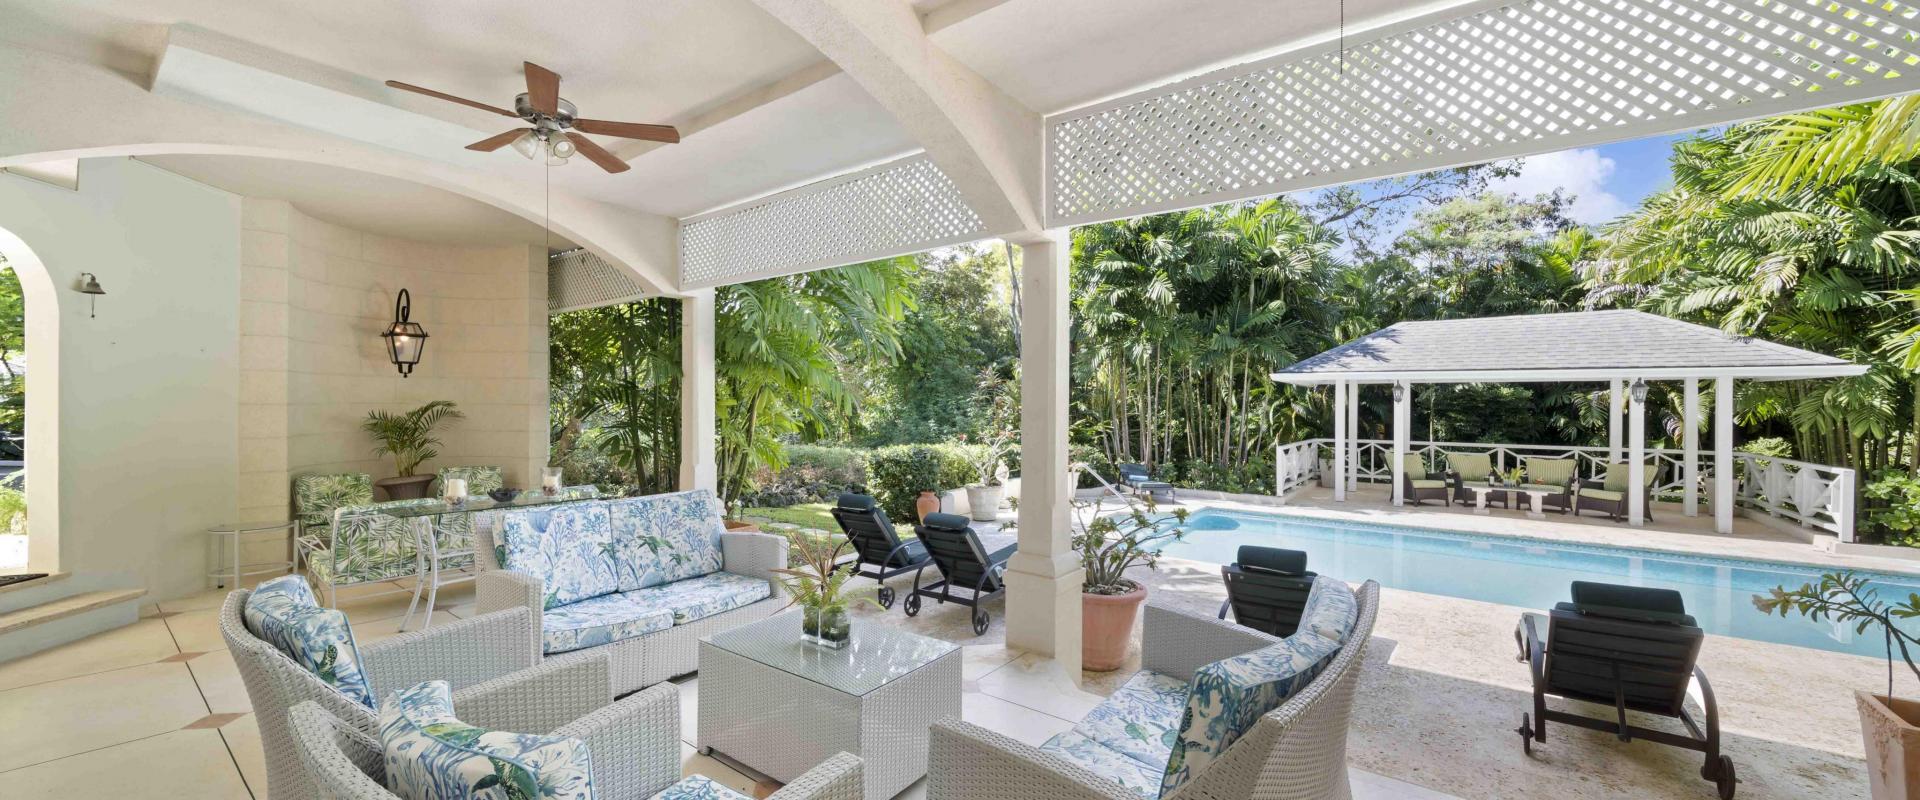 Dene Court Sandy Lane Barbados Lounge and Seating Area by Pool Deck